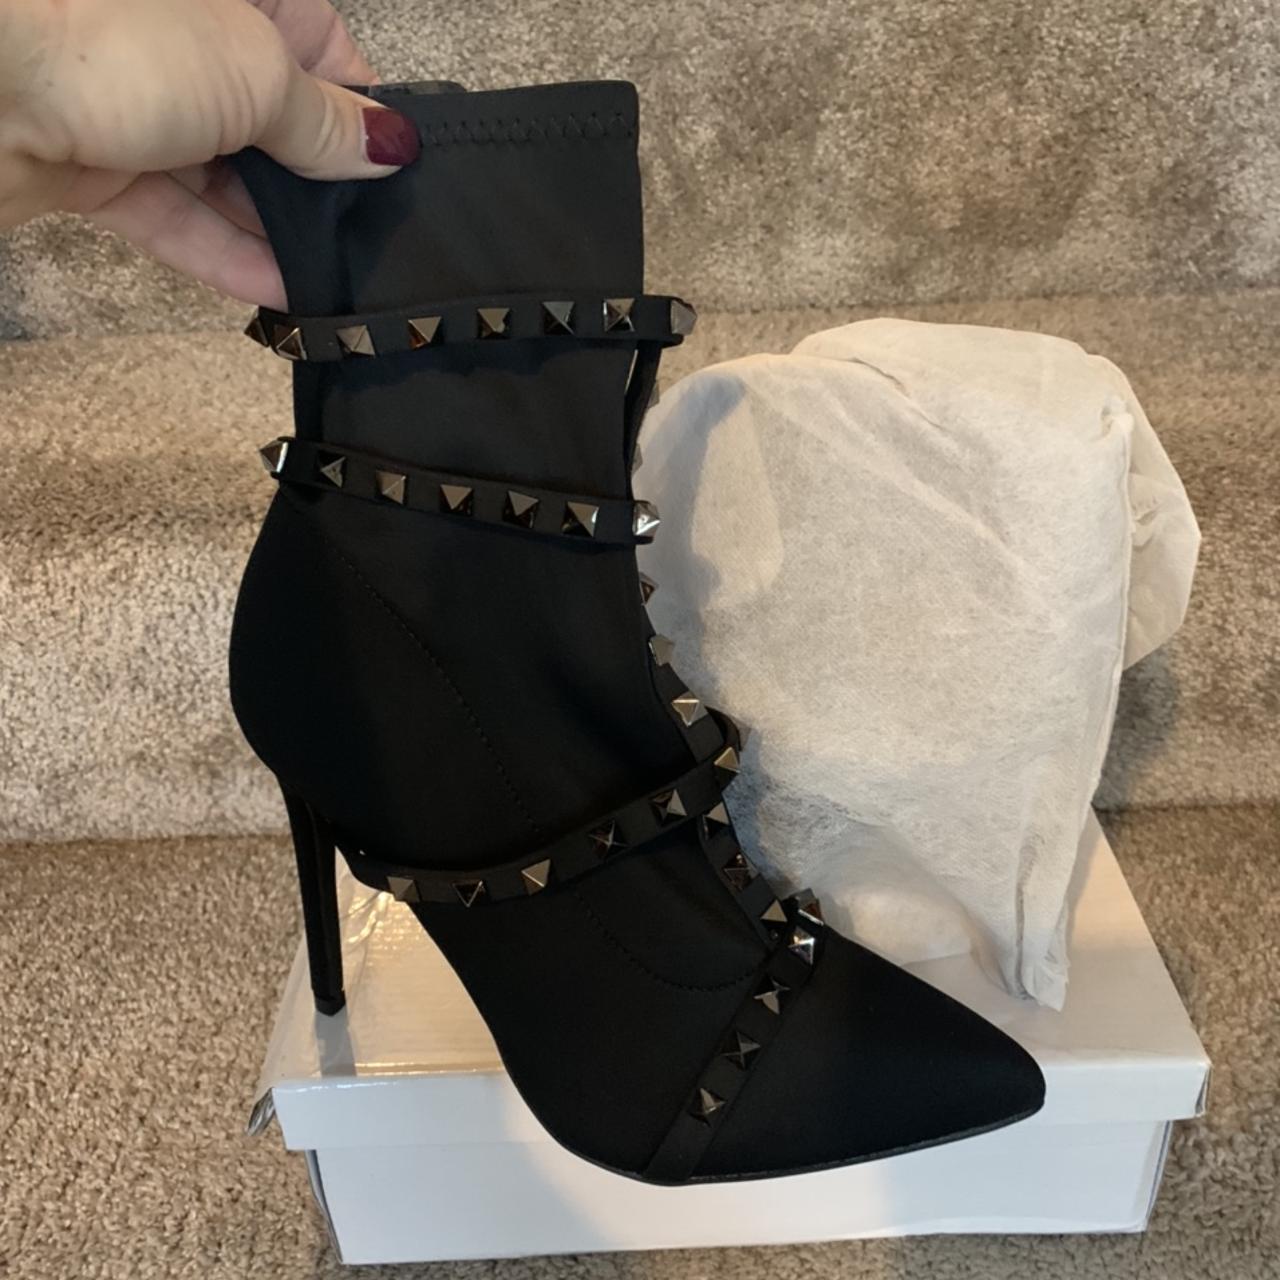 New & boxed Valentino style boots uk 6 Christmas... - Depop